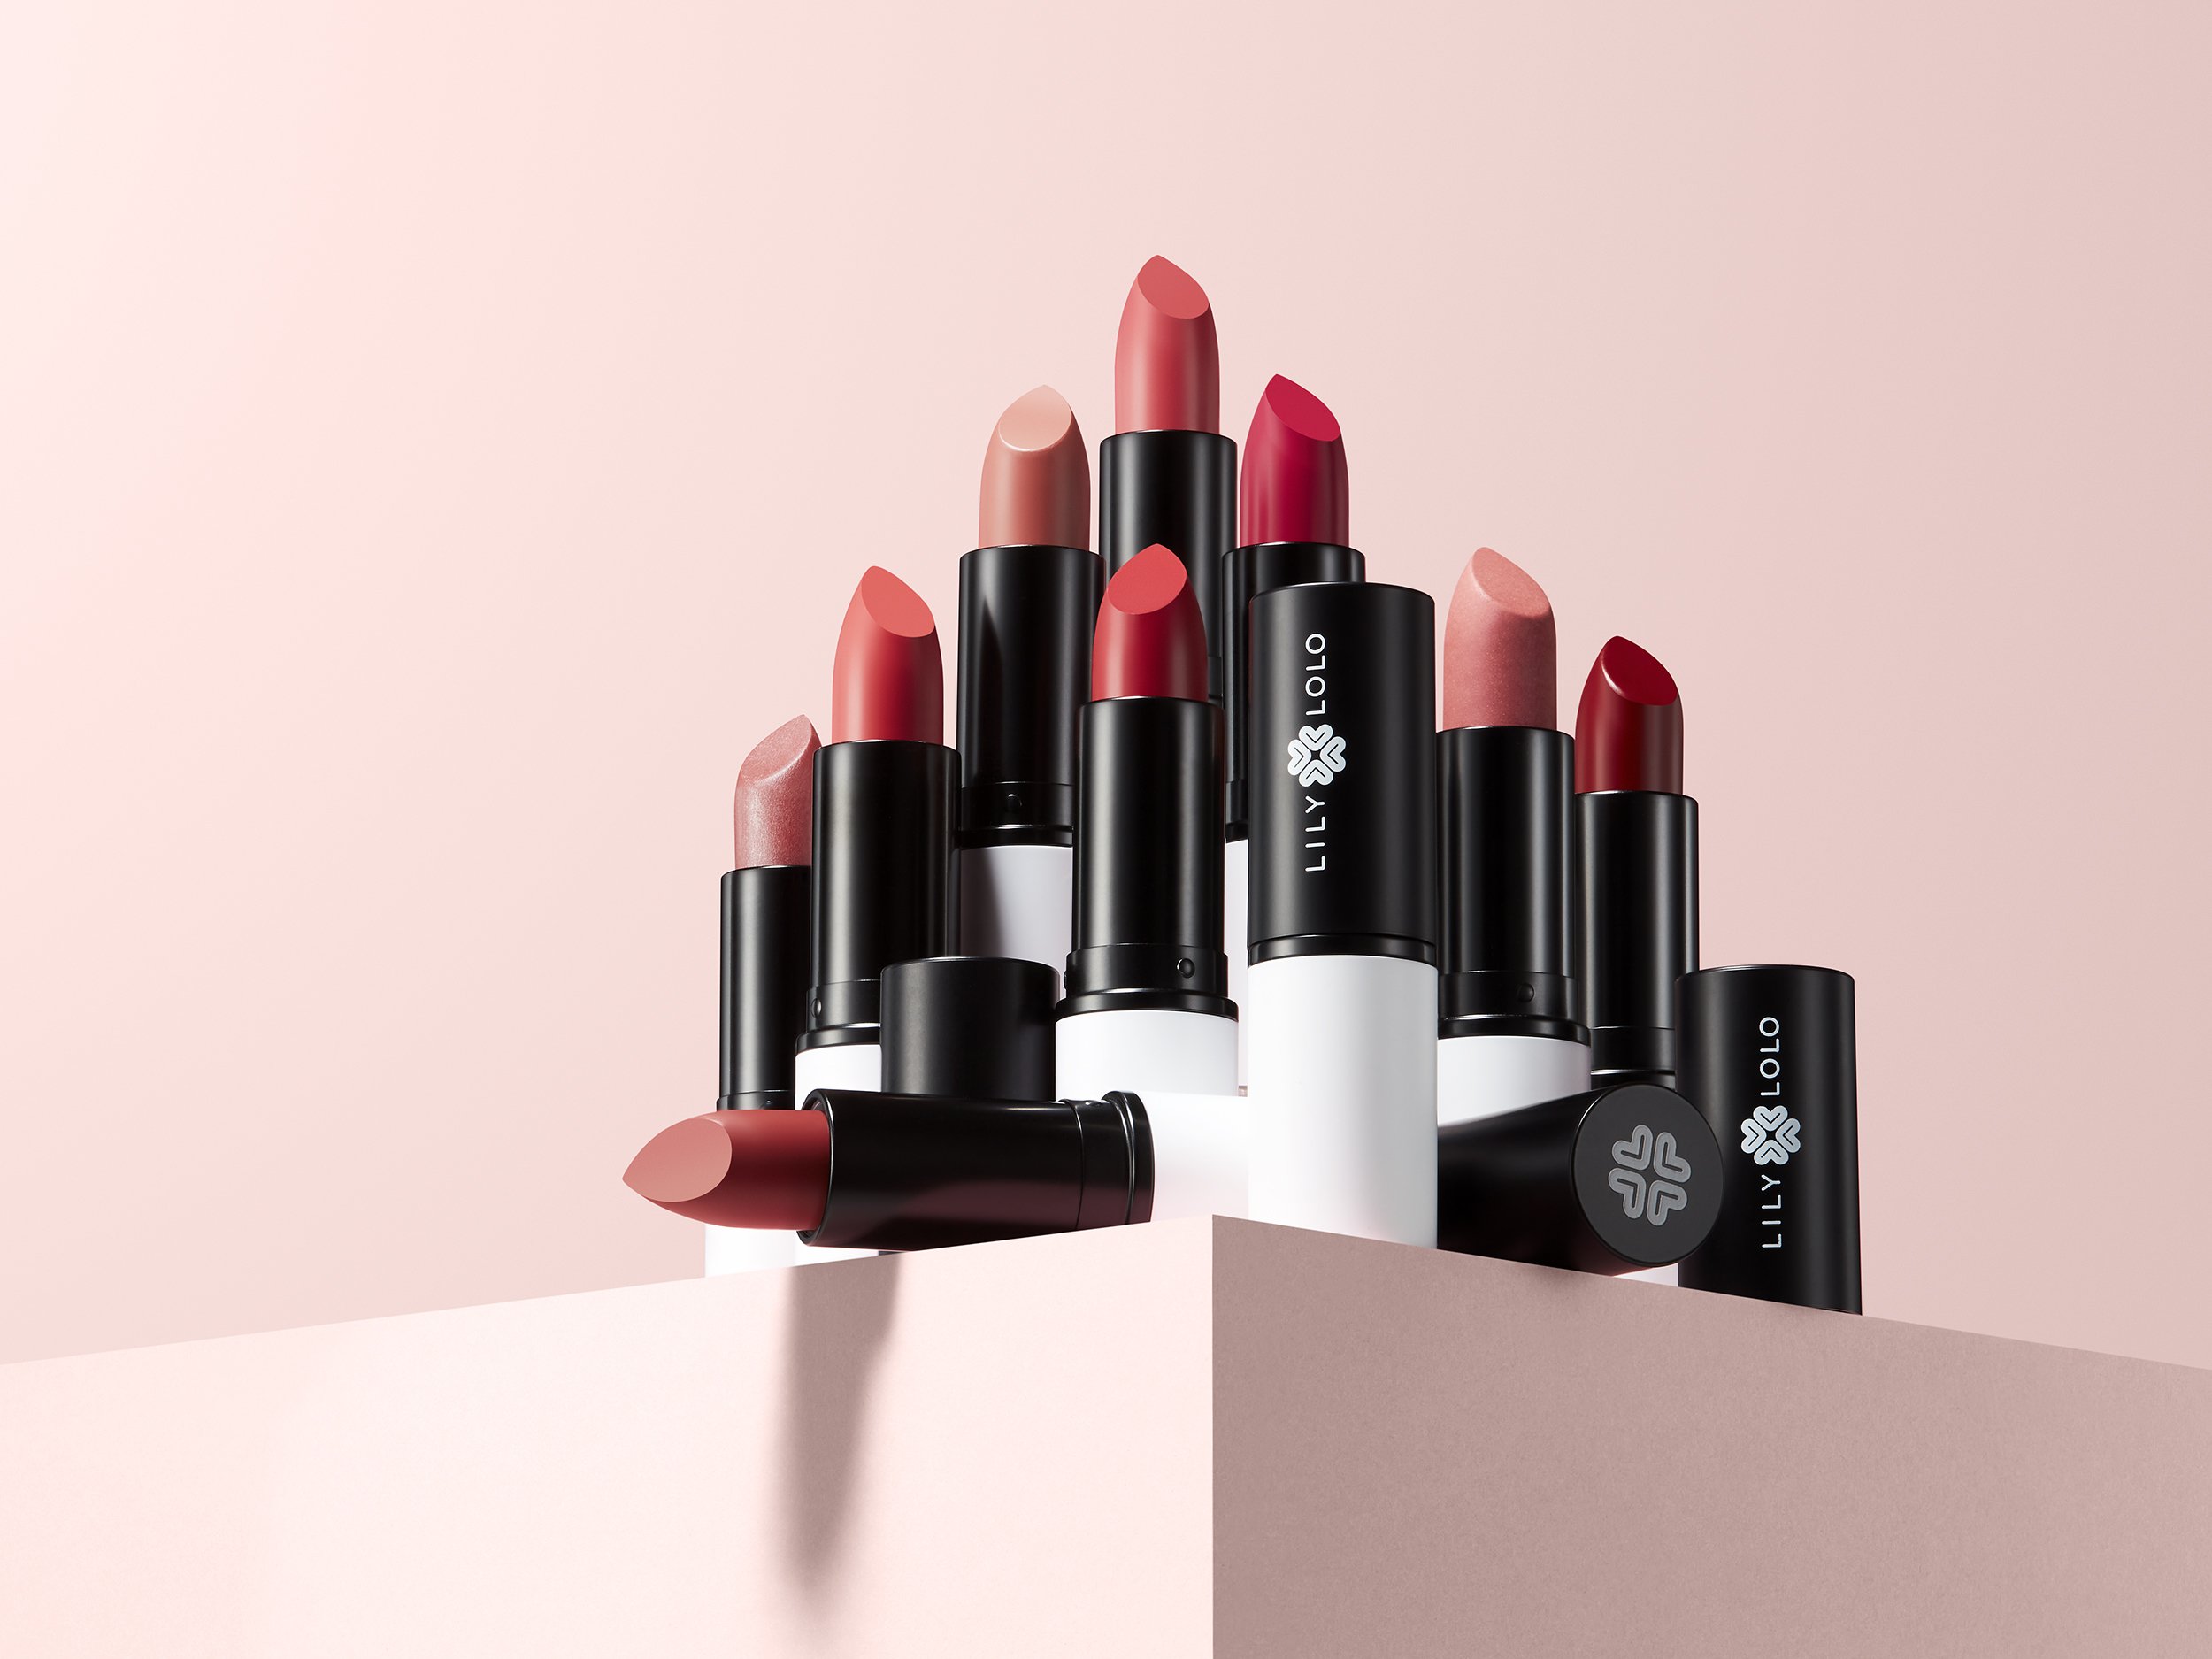 Lily Lolo Lipstick Collection - Still life beauty photography by Simon Lyle Ritchie